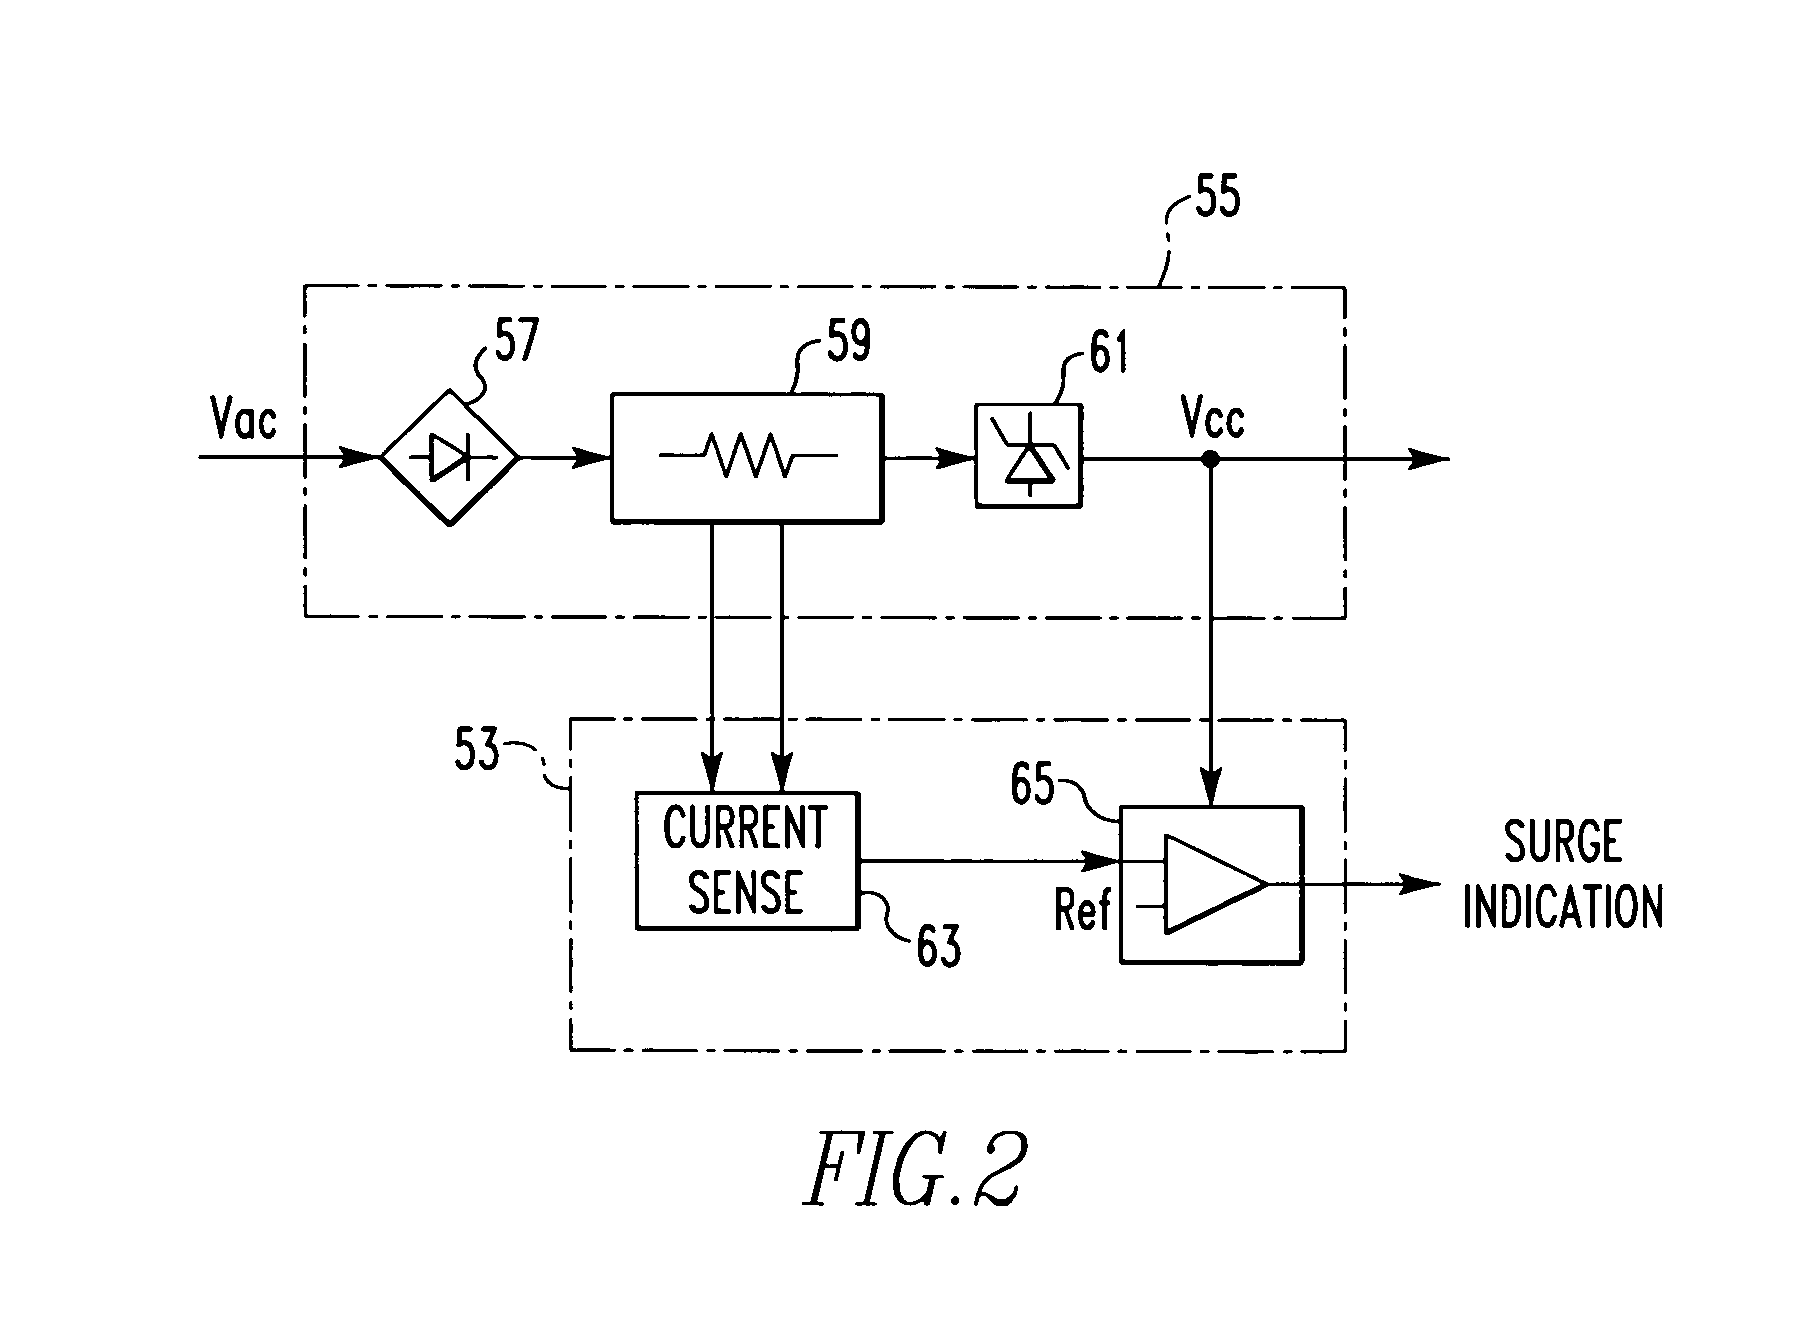 Monitor providing cause of trip indication and circuit breaker incorporating the same